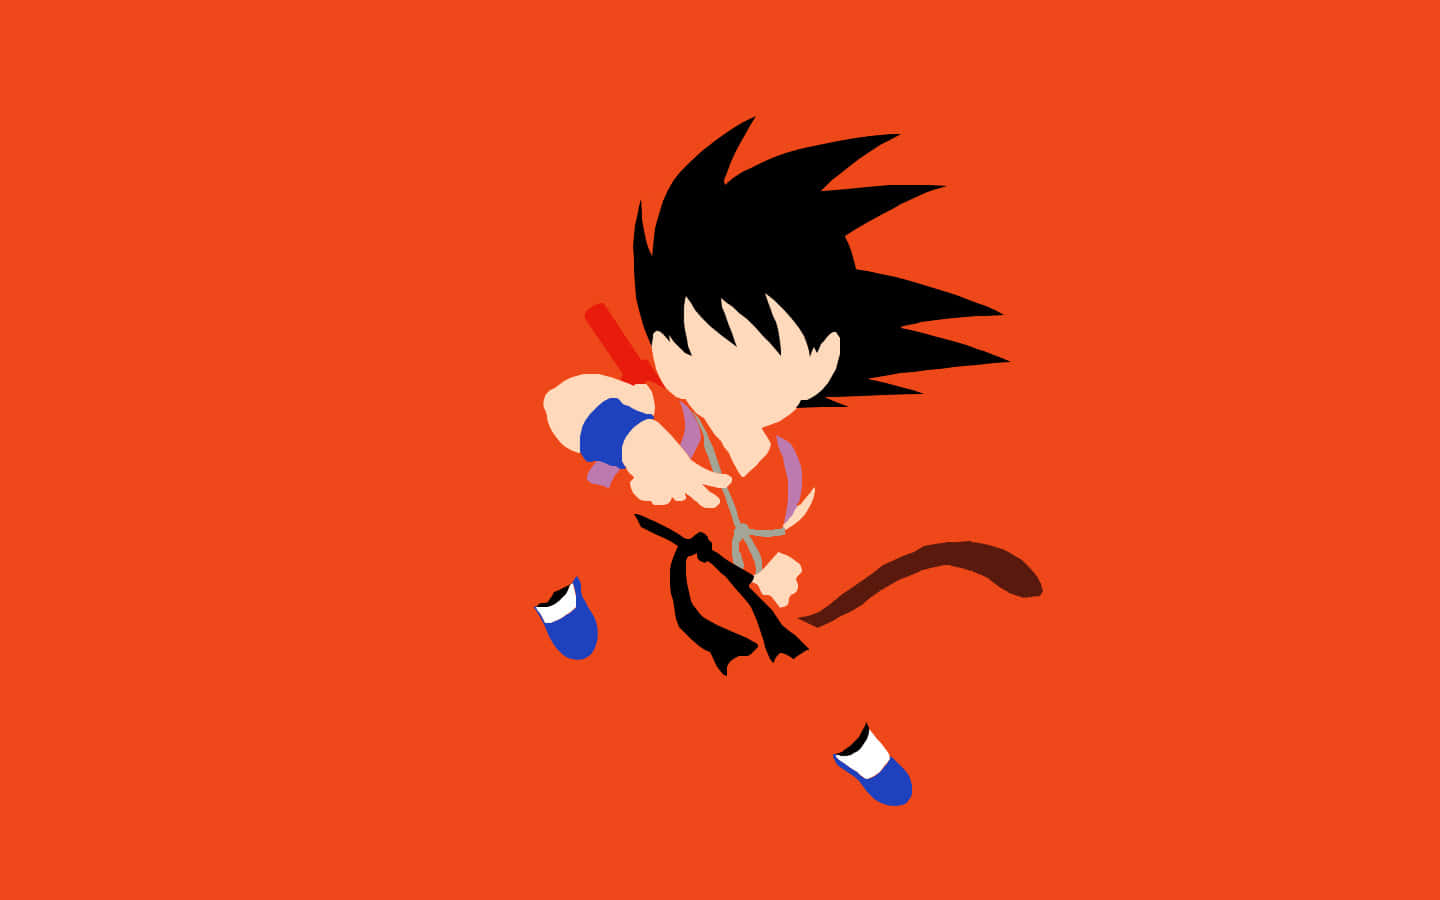 Barngohan Omvandlas Till Super Saiyan – This Would Be A Suitable Translation For A Computer Or Mobile Wallpaper Featuring An Image Of The Animated Character Kid Gohan Transforming Into His Super Saiyan Form From The Popular Anime And Manga Series Dragon Ball Z. Wallpaper